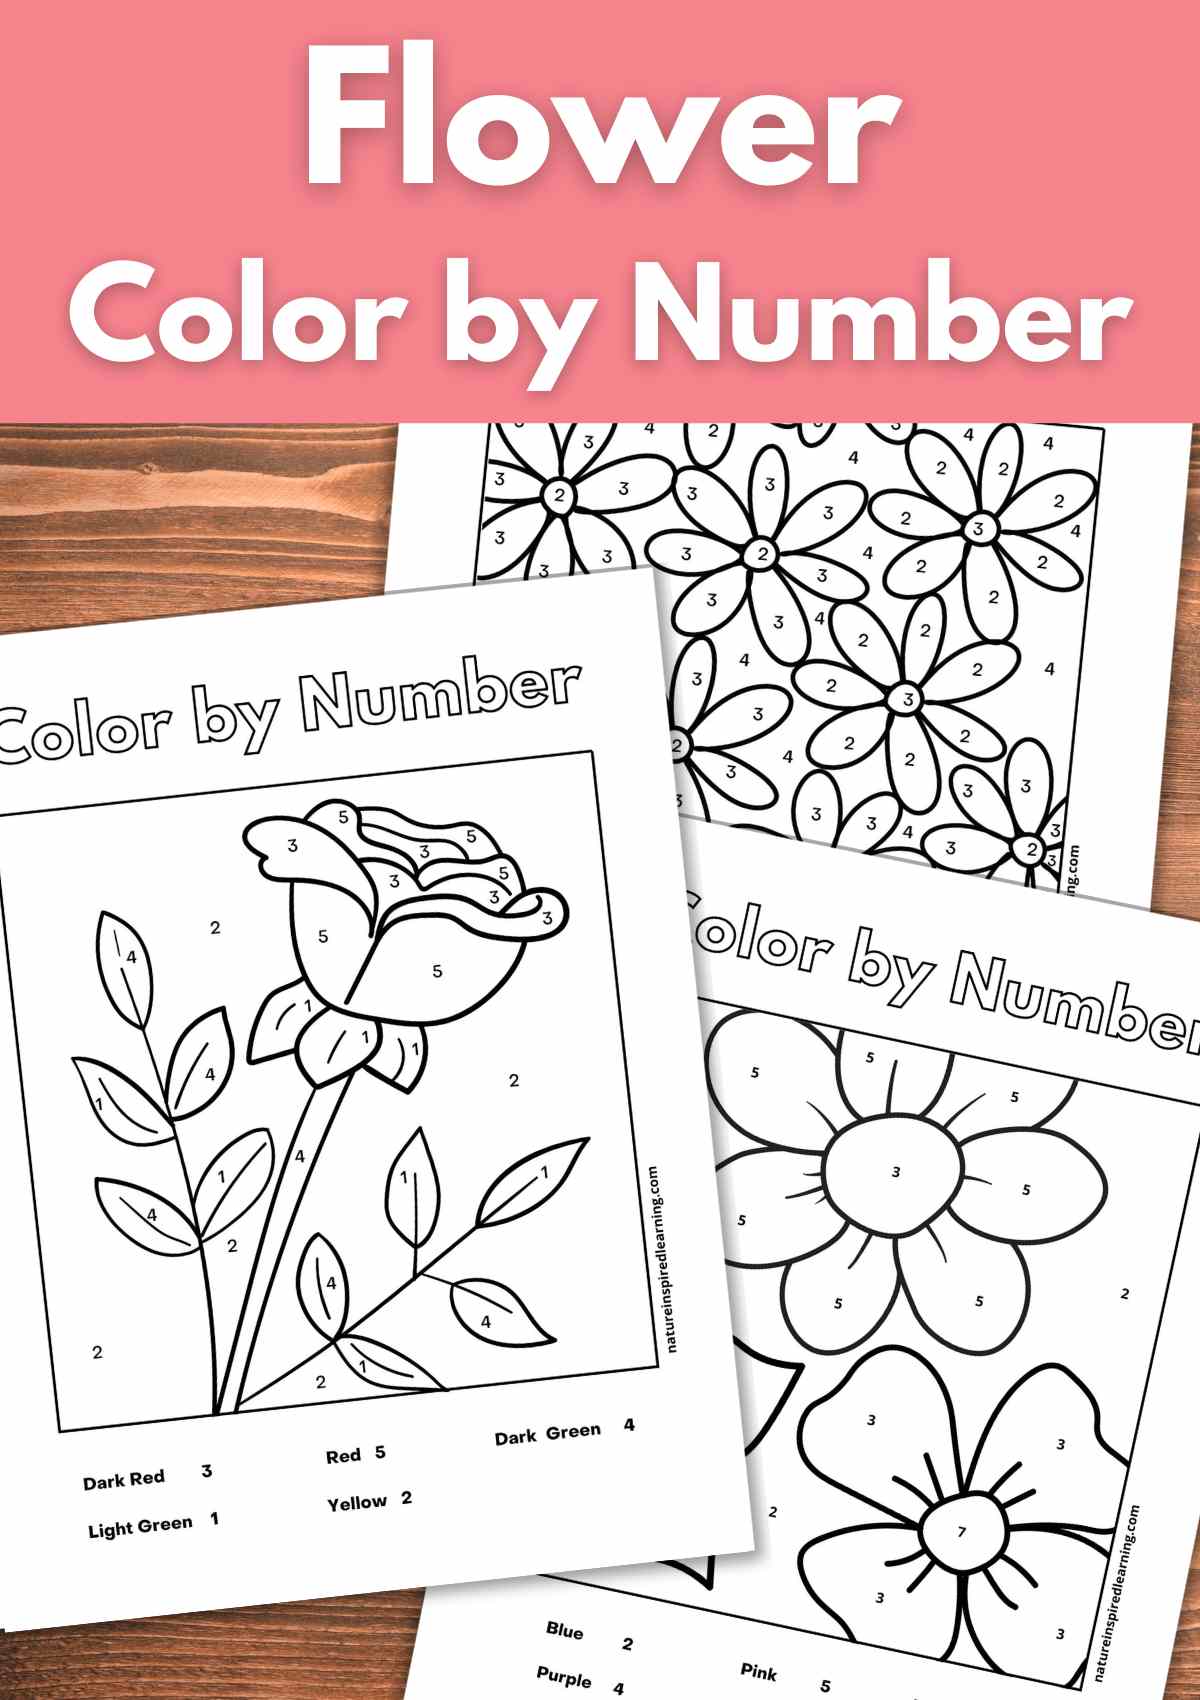 three black and white sheets with different flower designs with numbers and color keys overlapping on a wooden background. Light pink rectangle across the top with a white text overlay.